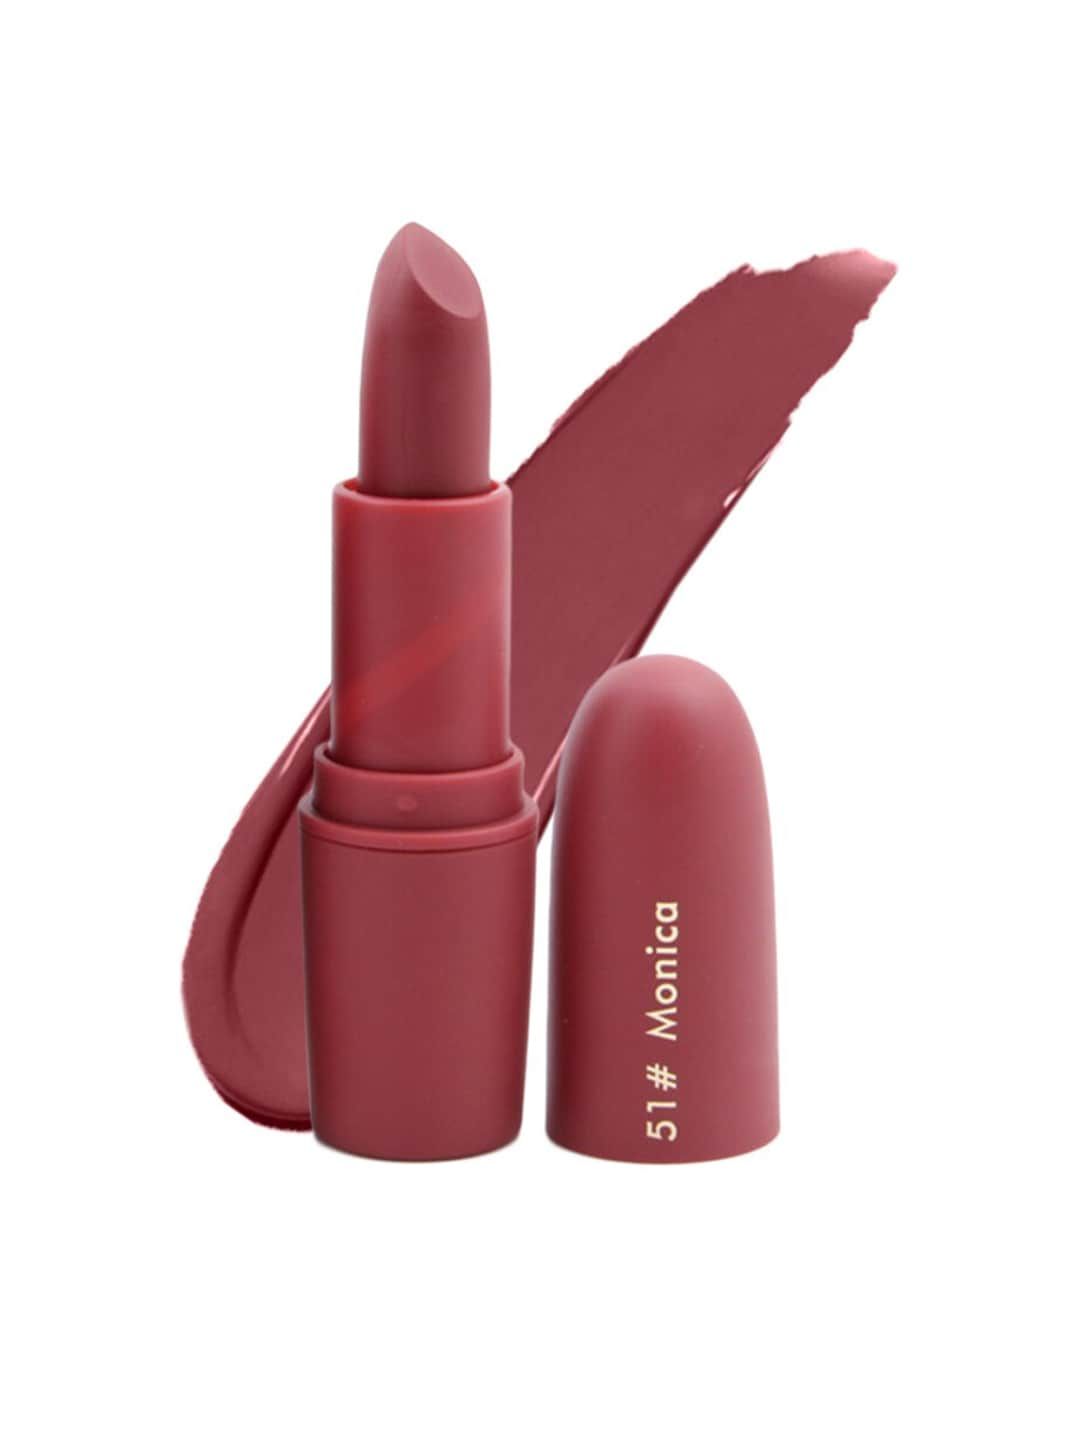 MISS ROSE Brown Creamy Matte Shade 51 Monica Bullet LipStick 7301-026B 51 Price in India